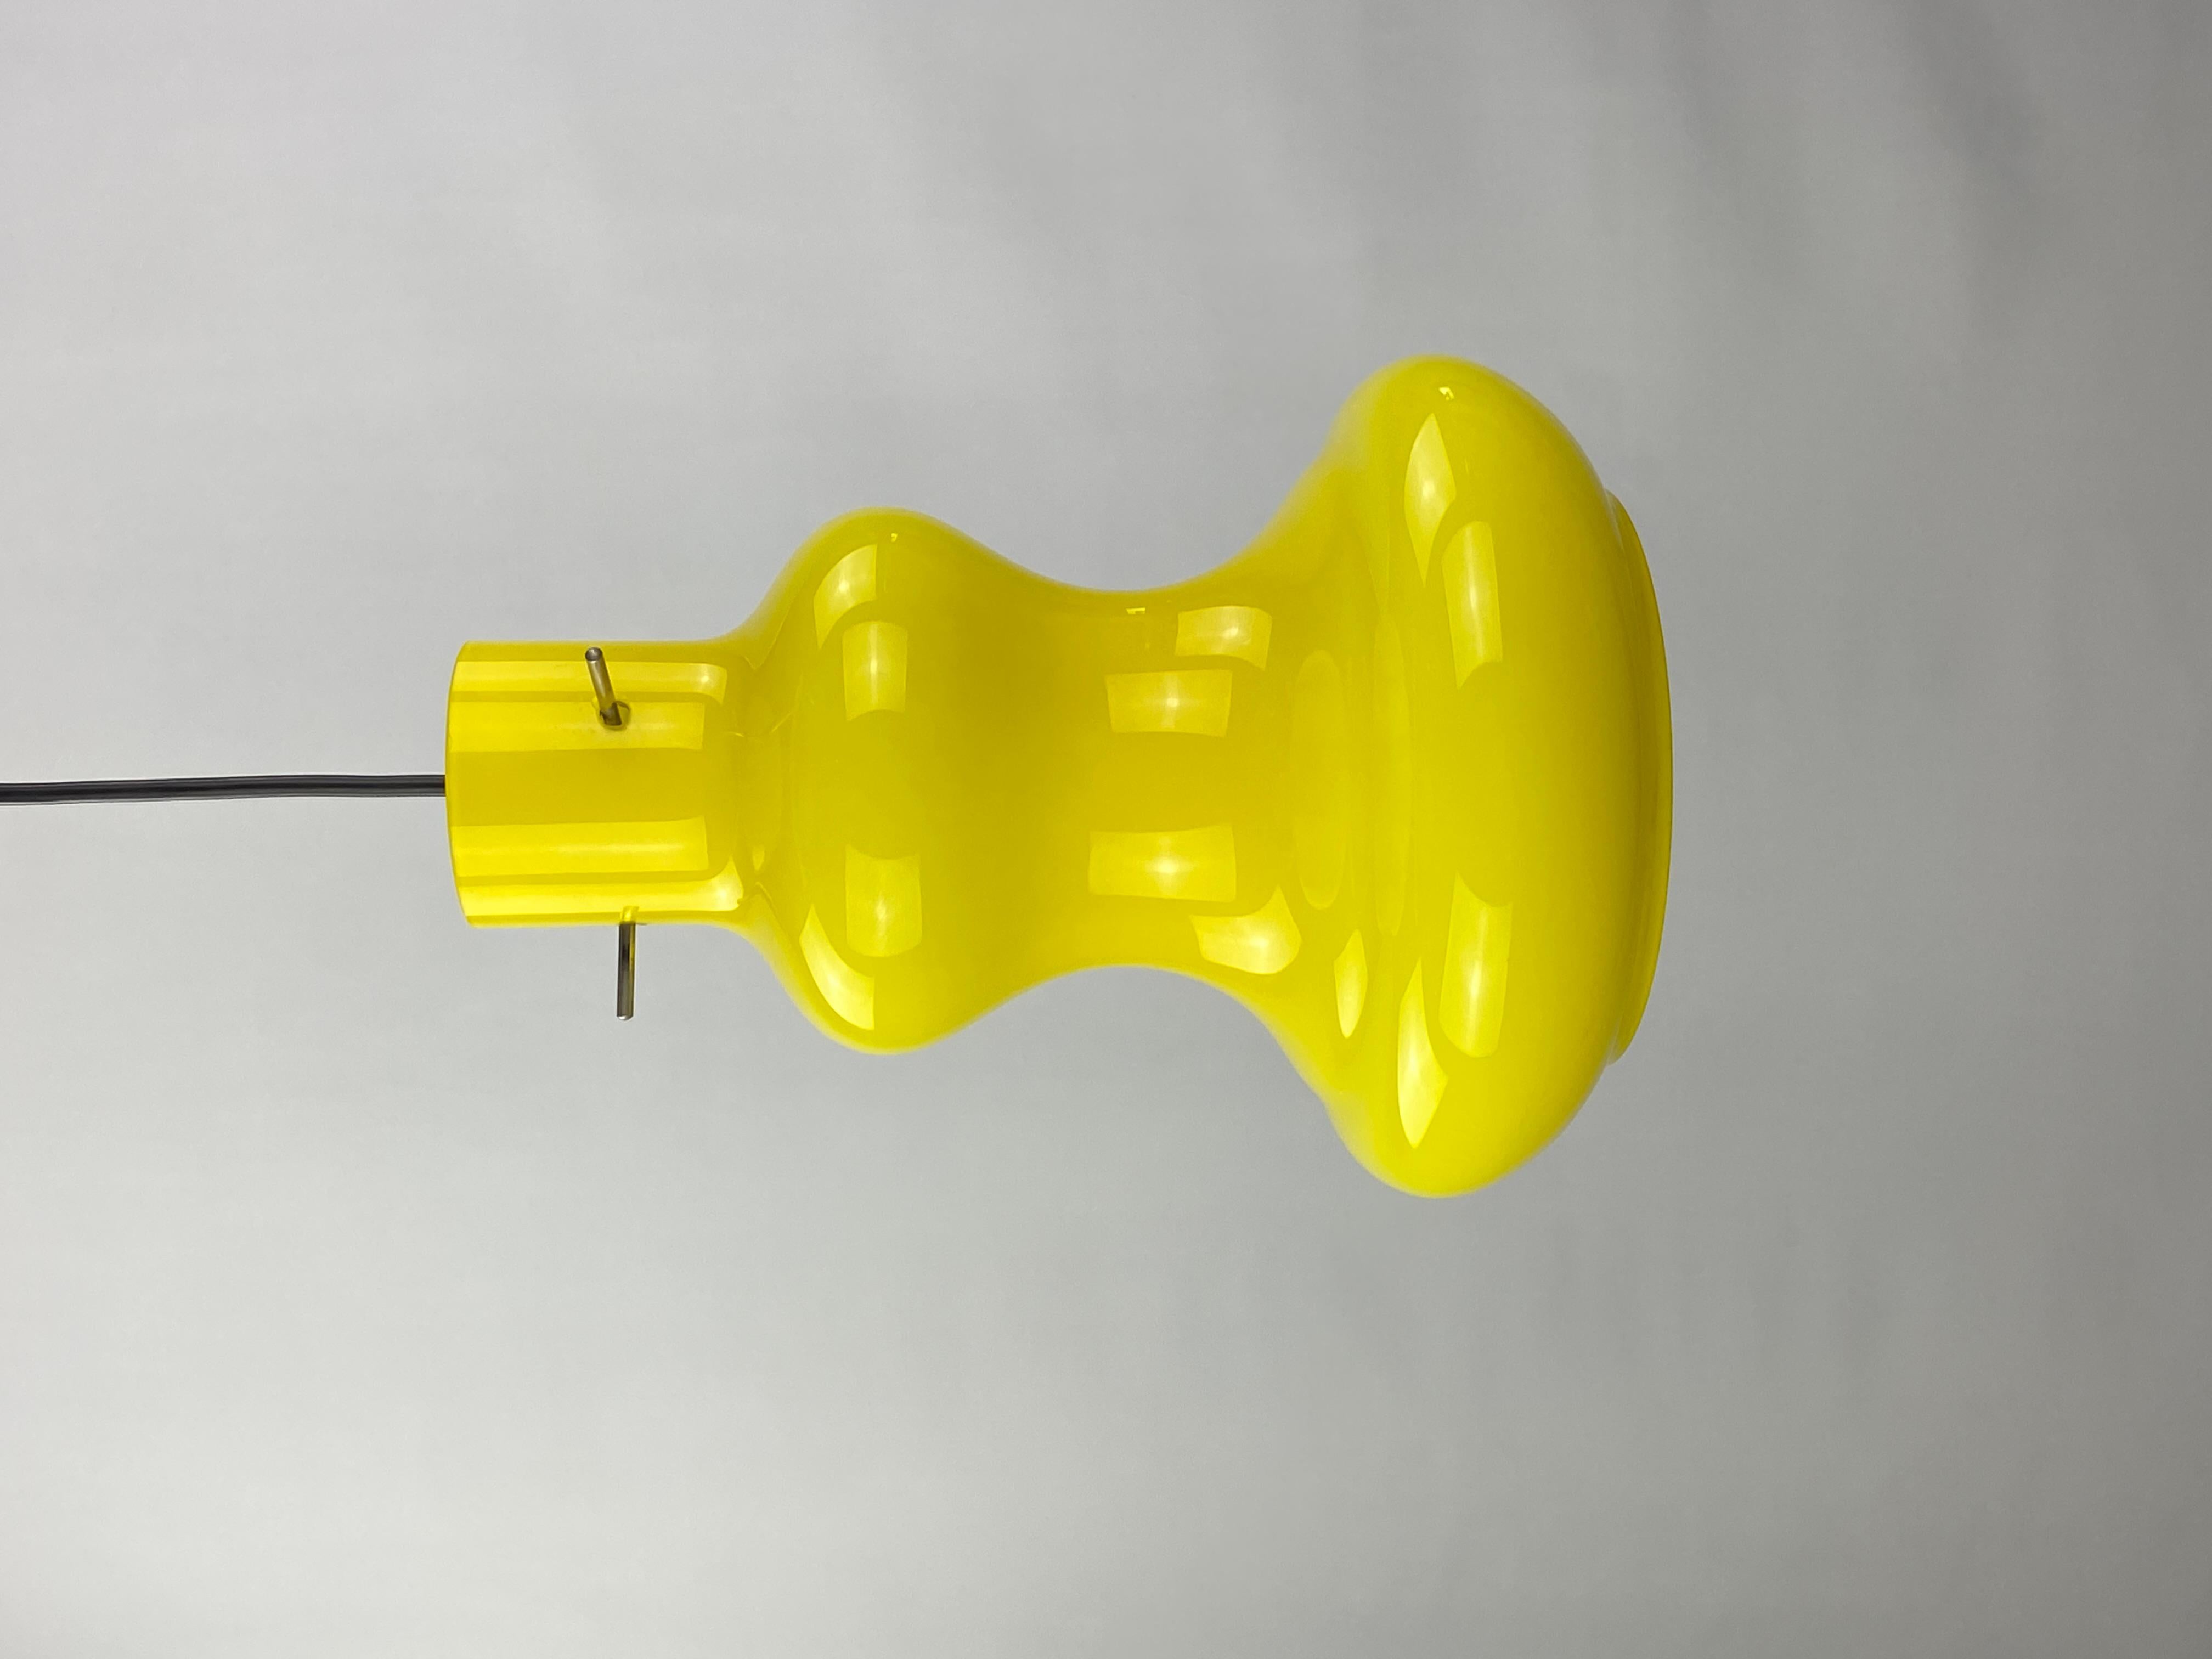 Italian hanging lamp by Gino Vistosi Vetreria for Massimo Vignelli from 1960 and made from Murano glass. It has a beautiful bright yellow color and produces different tones of yellow when on.

DIMENSIONS
Height: 29cm
Diameter: 22cm
Cord length: